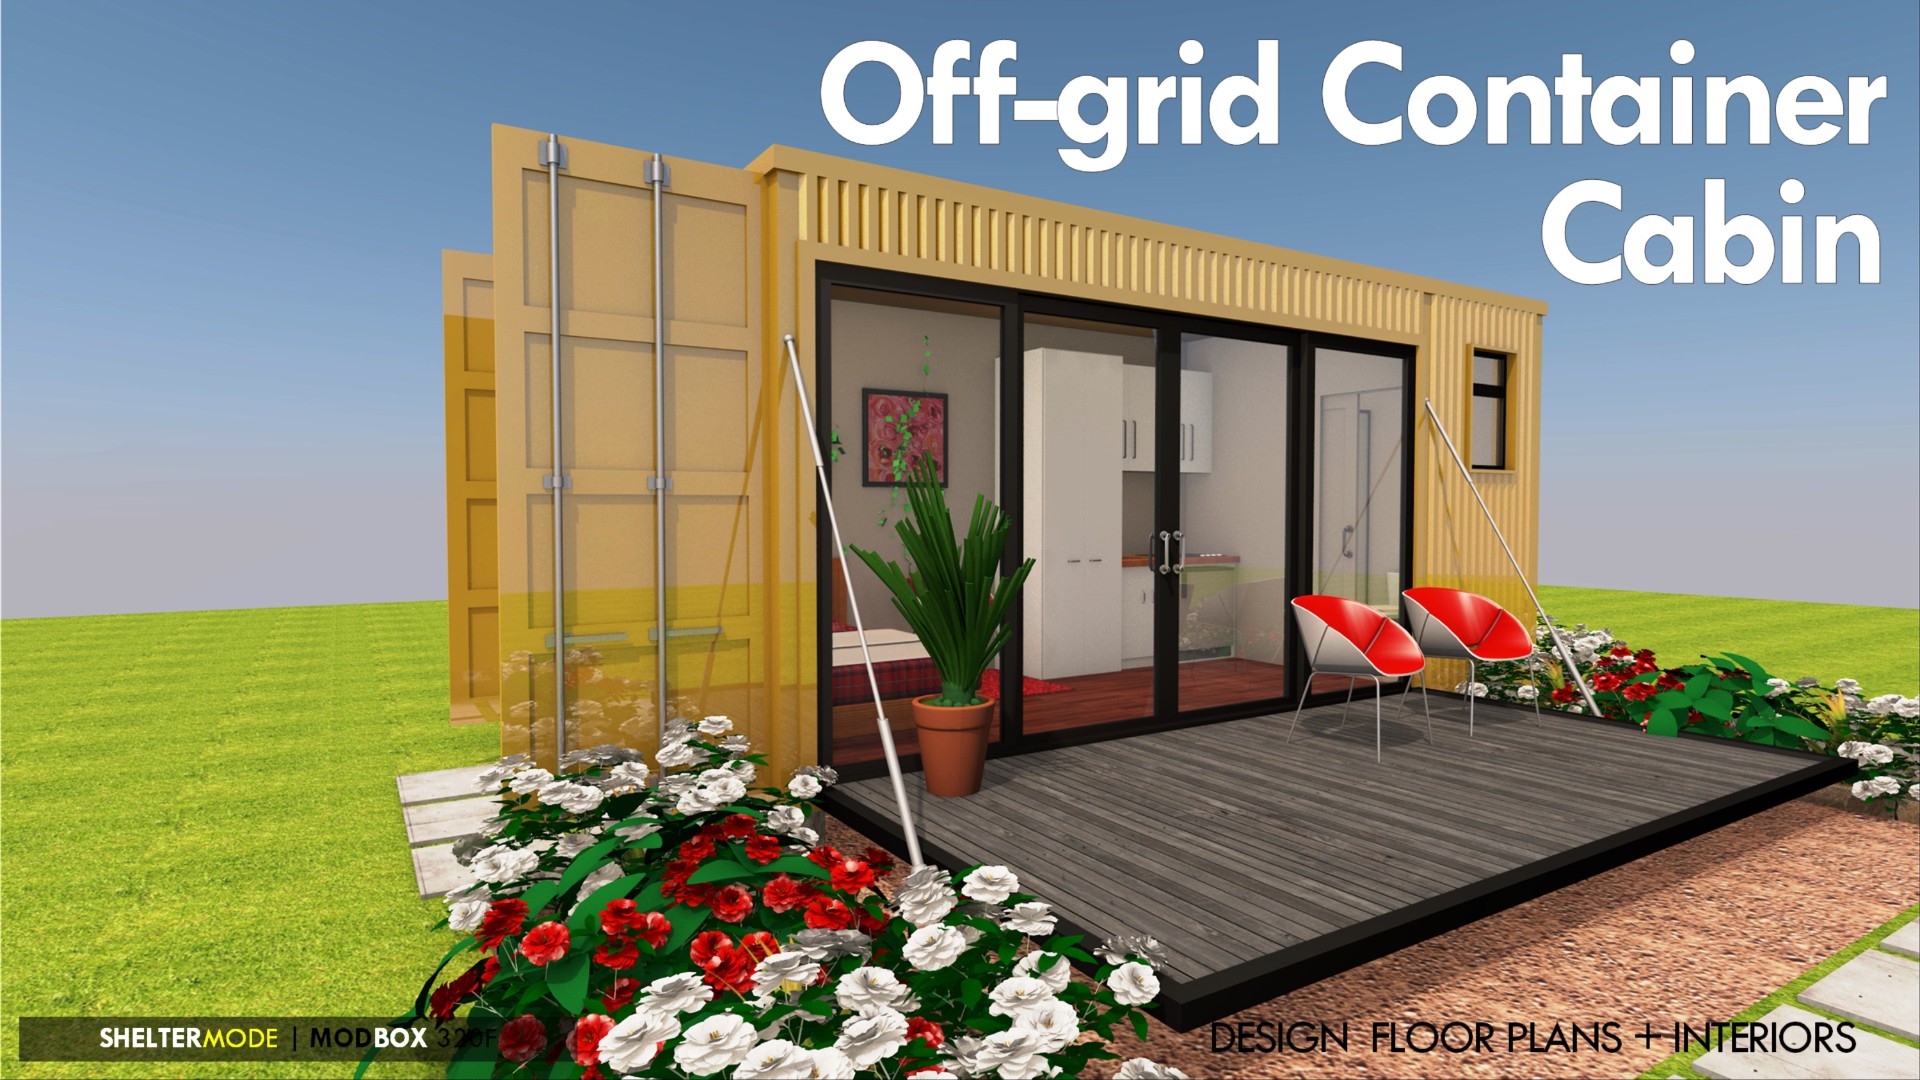 An Off-grid Shipping Container Cabin Design with a Folding Deck